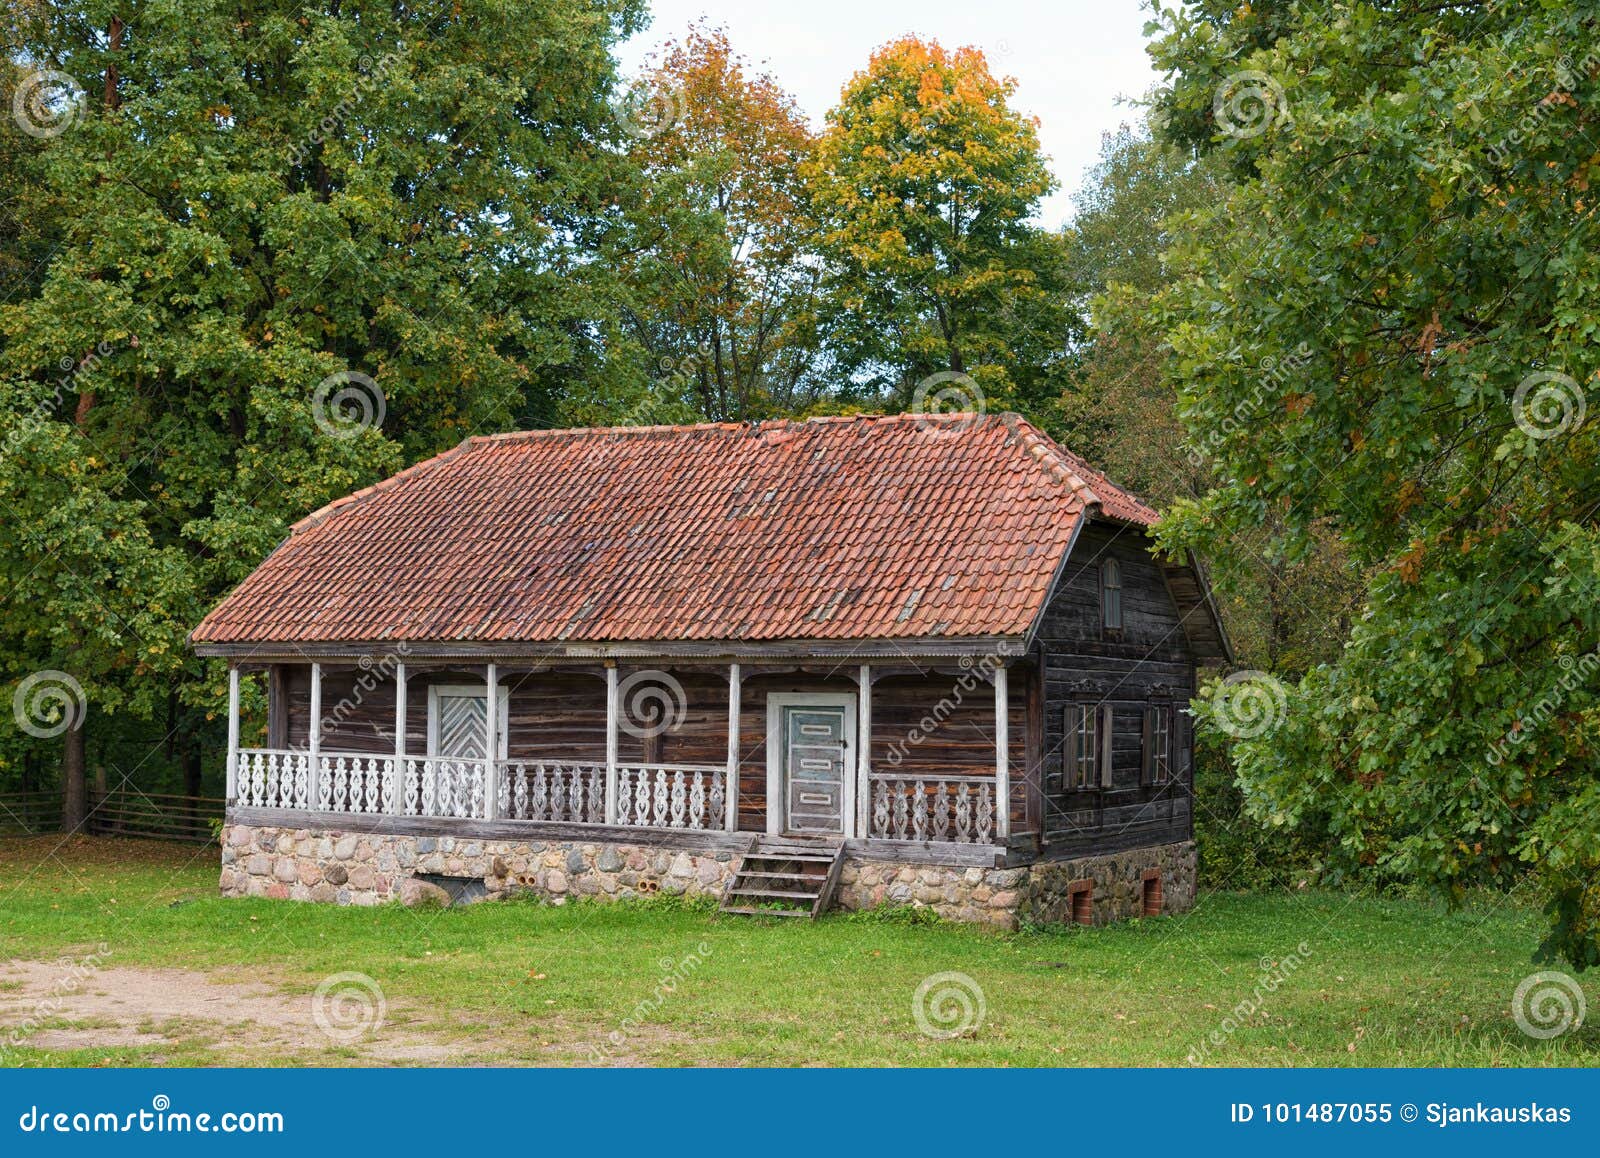 old wooden house rumsiskes lithuania